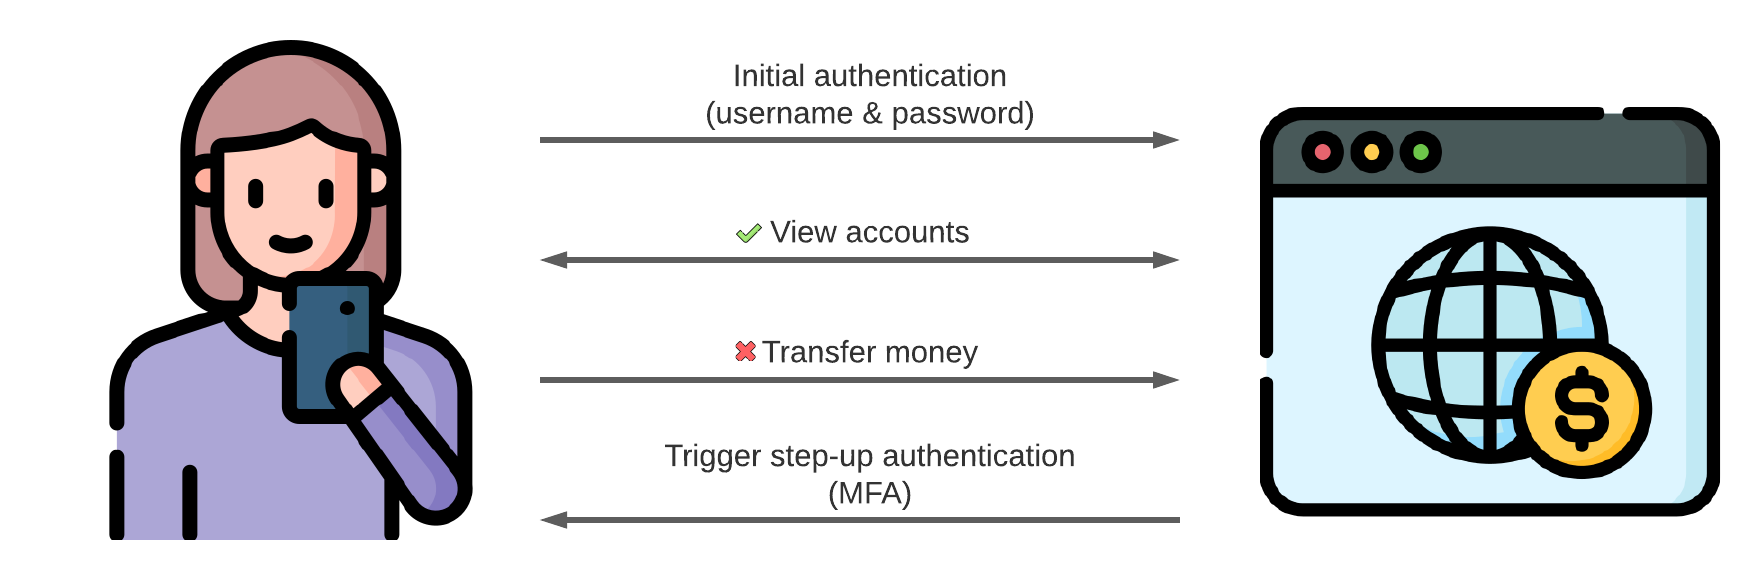 A user initially authenticating using a password and being able to view their accounts. Then they try to transfer money but step-up authentication is triggered, asking them to authenticate using multi-factor authentication.